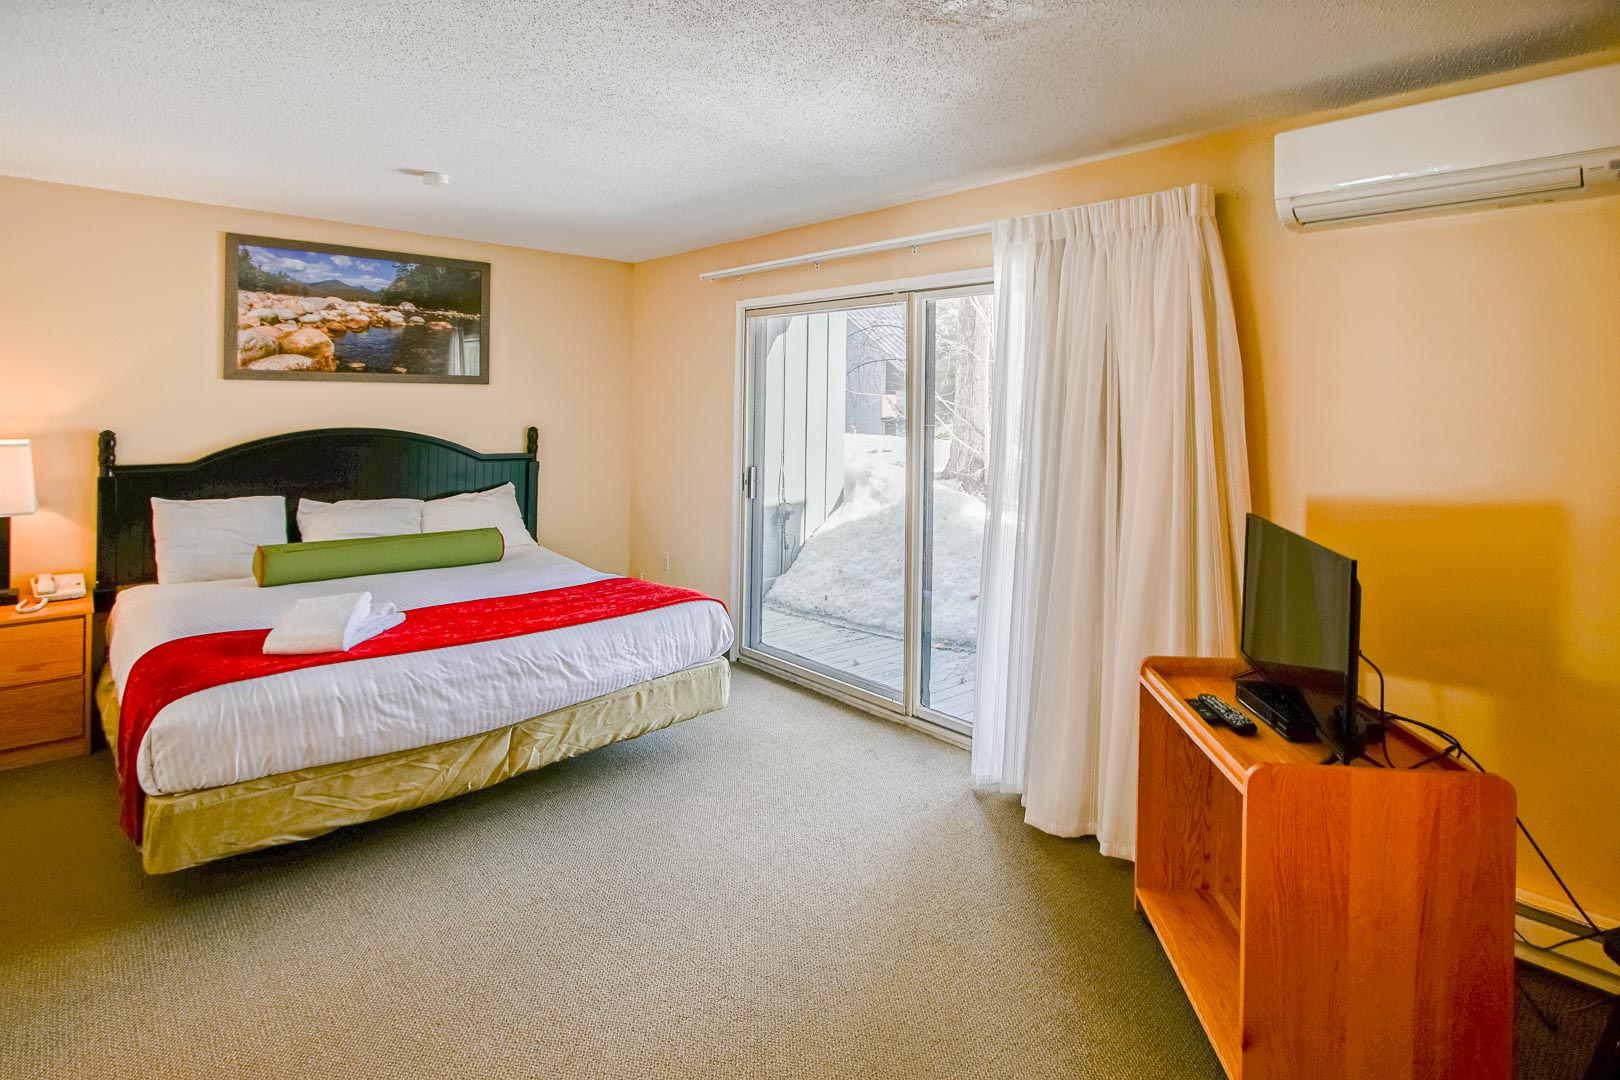 A spacious two-bedroom unit at VRI's Village of Loon Mountain in New Hampshire.